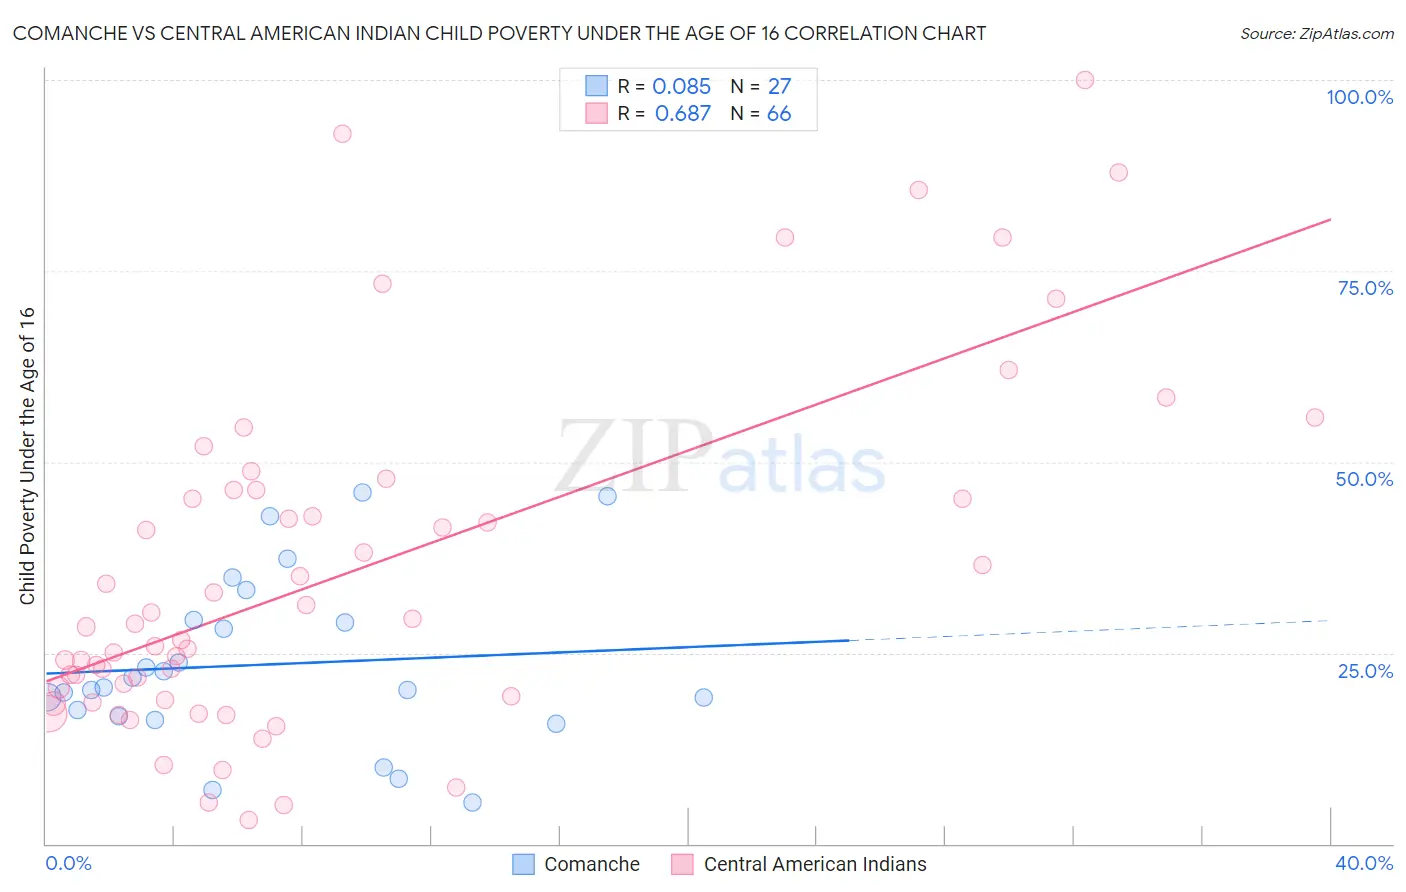 Comanche vs Central American Indian Child Poverty Under the Age of 16